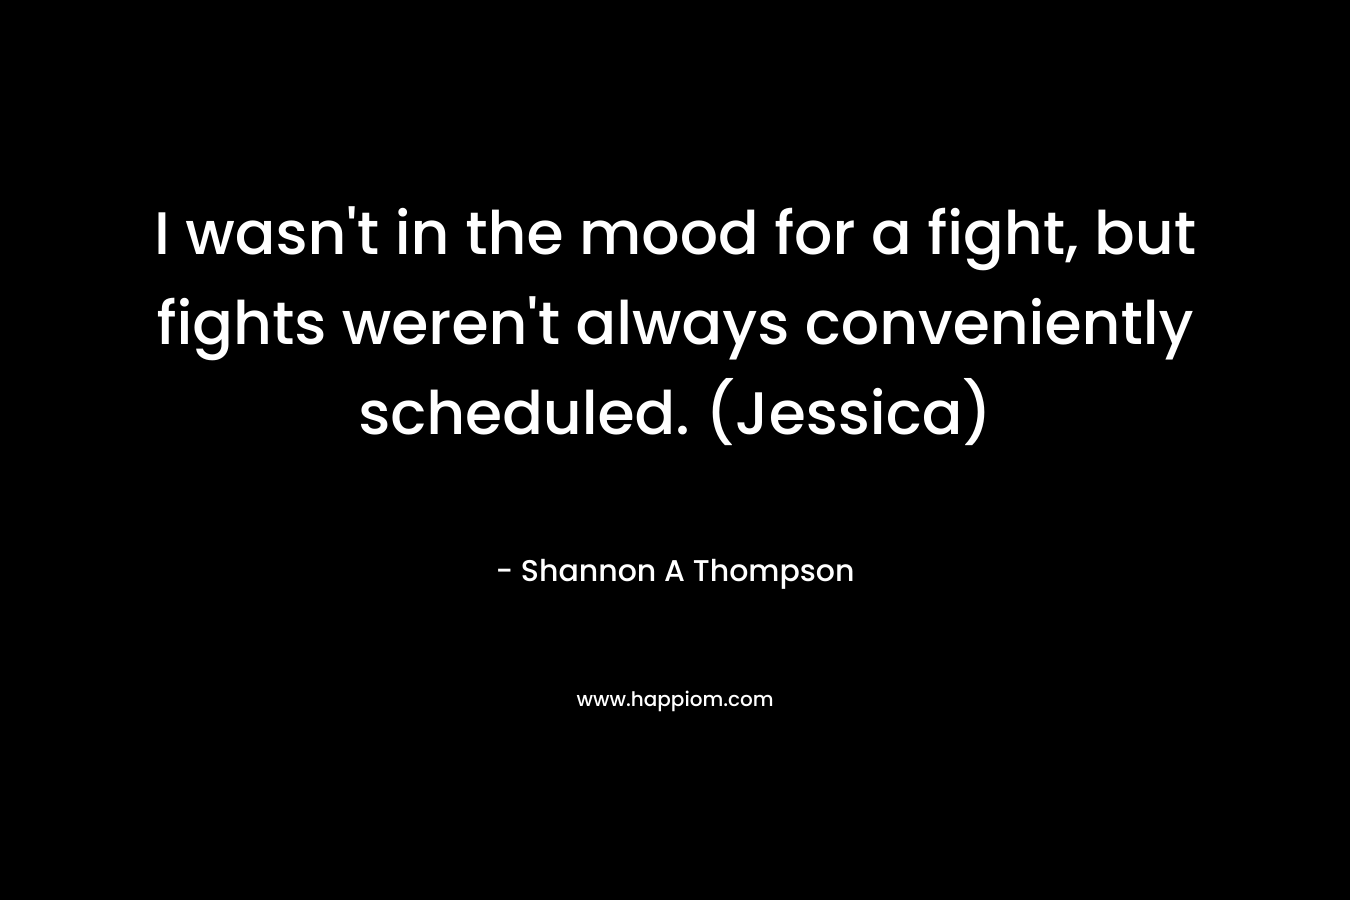 I wasn't in the mood for a fight, but fights weren't always conveniently scheduled. (Jessica)